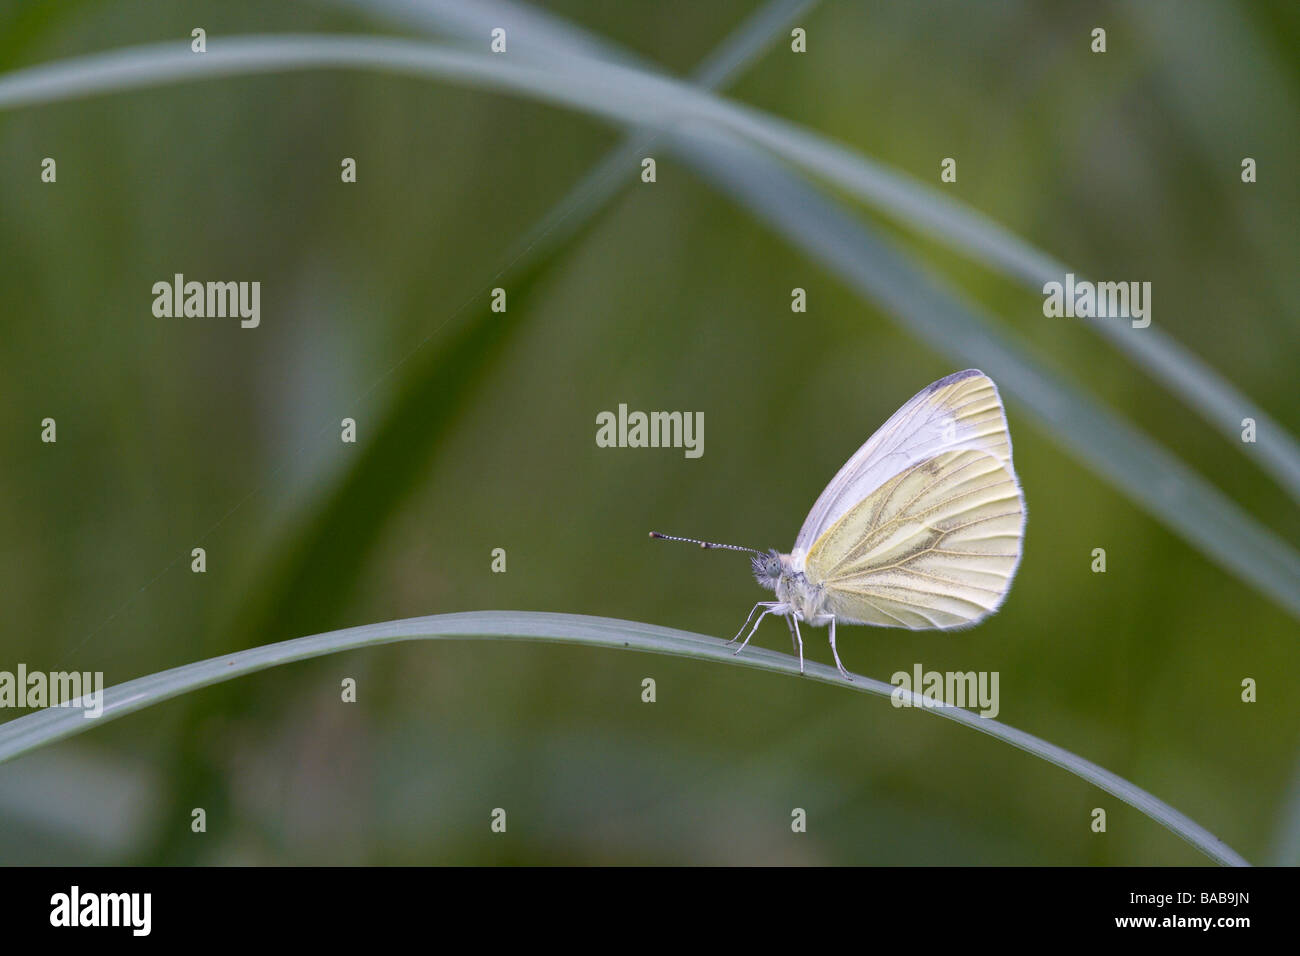 White butterfly on a blade of grass Stock Photo